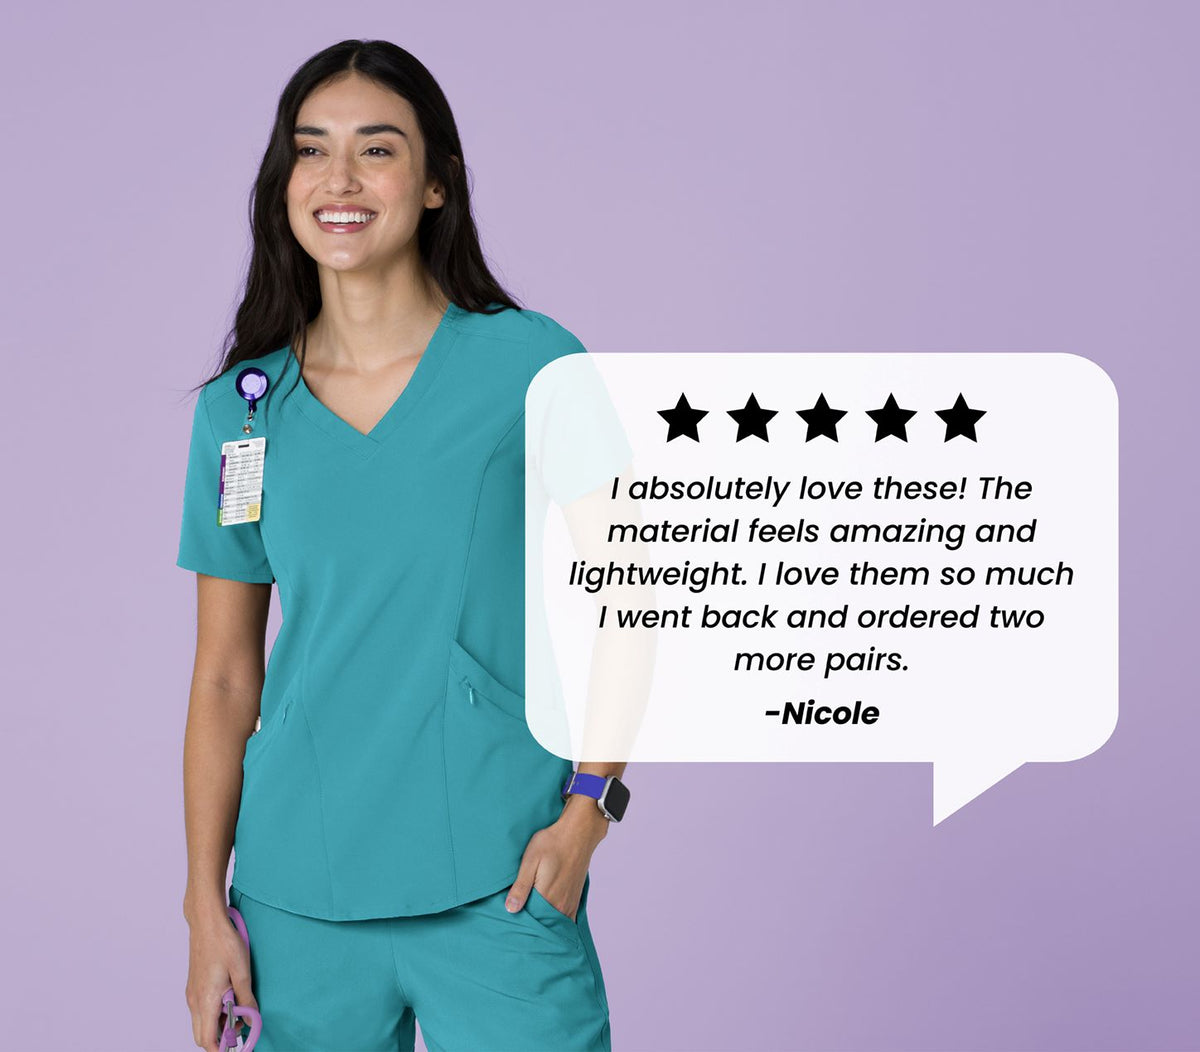 "I absolutely love these! The material feels amazing and lightweight. I love them so much I went back and ordered two more pairs. - Nicole" Women's Teal Scrubs from Wink Renew